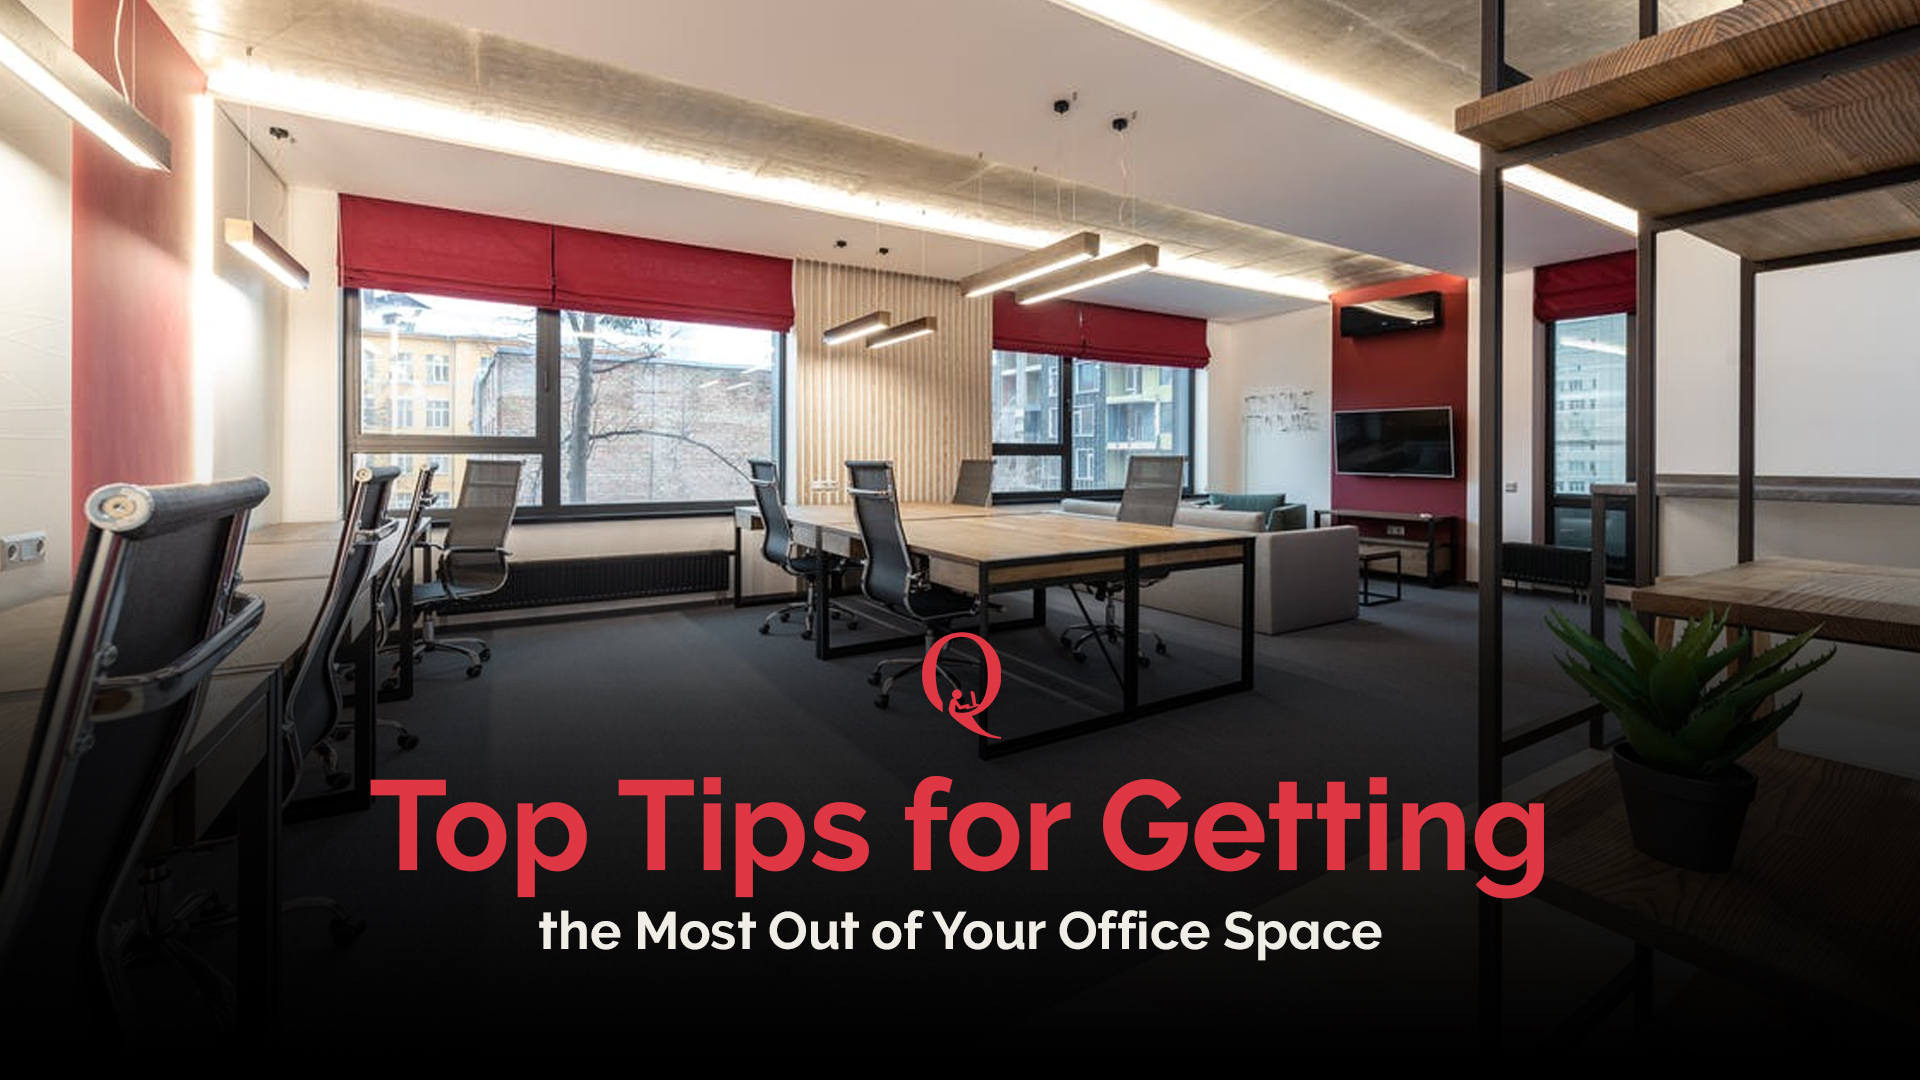 Top tips for getting the most out of your office space - Qdesq